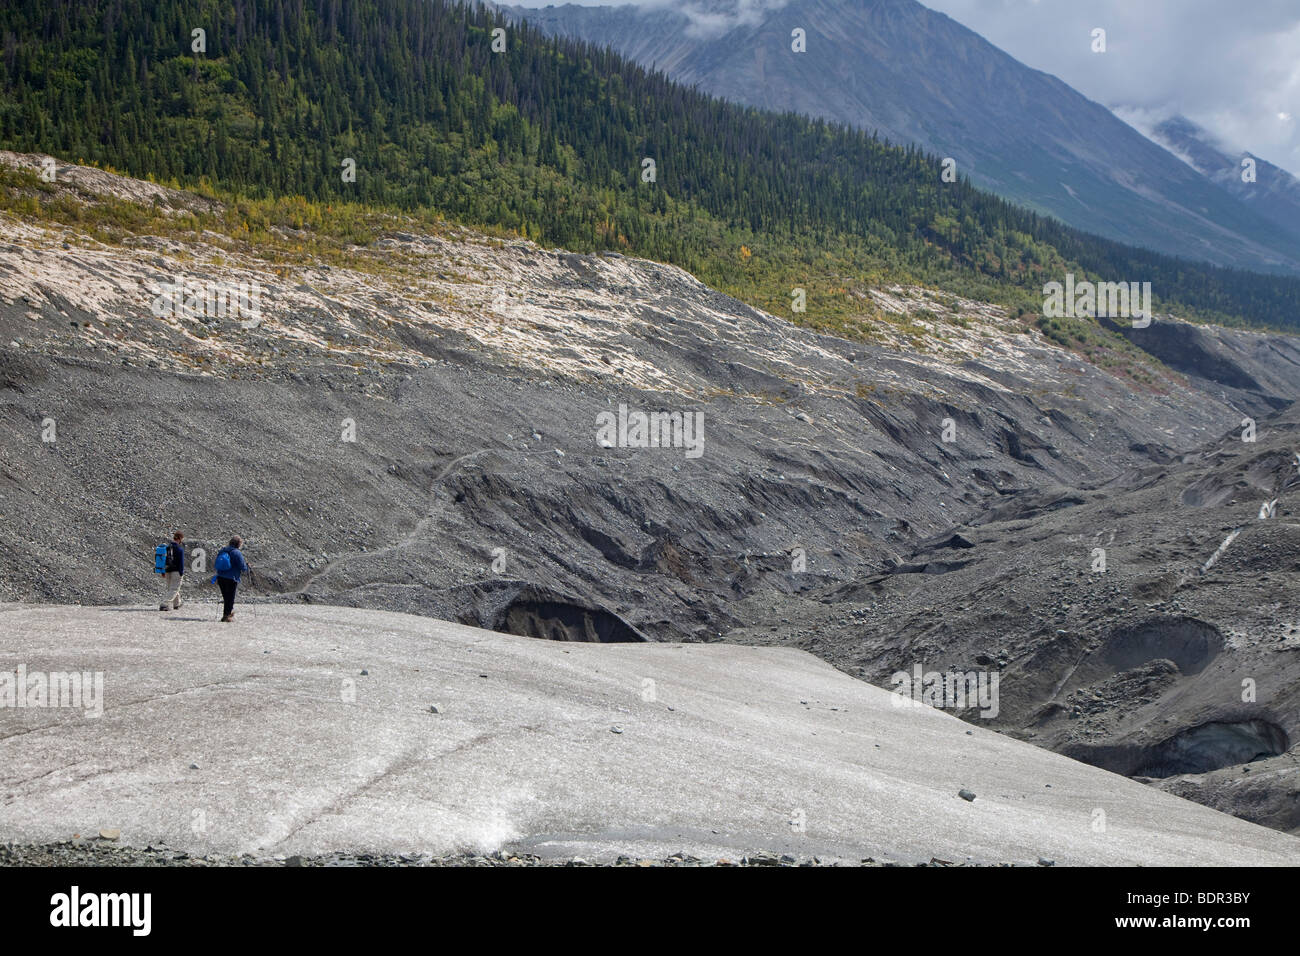 Kennicott, Alaska - A guide and a client hike on the Root Glacier in Wrangell-St. Elias National Park. Stock Photo